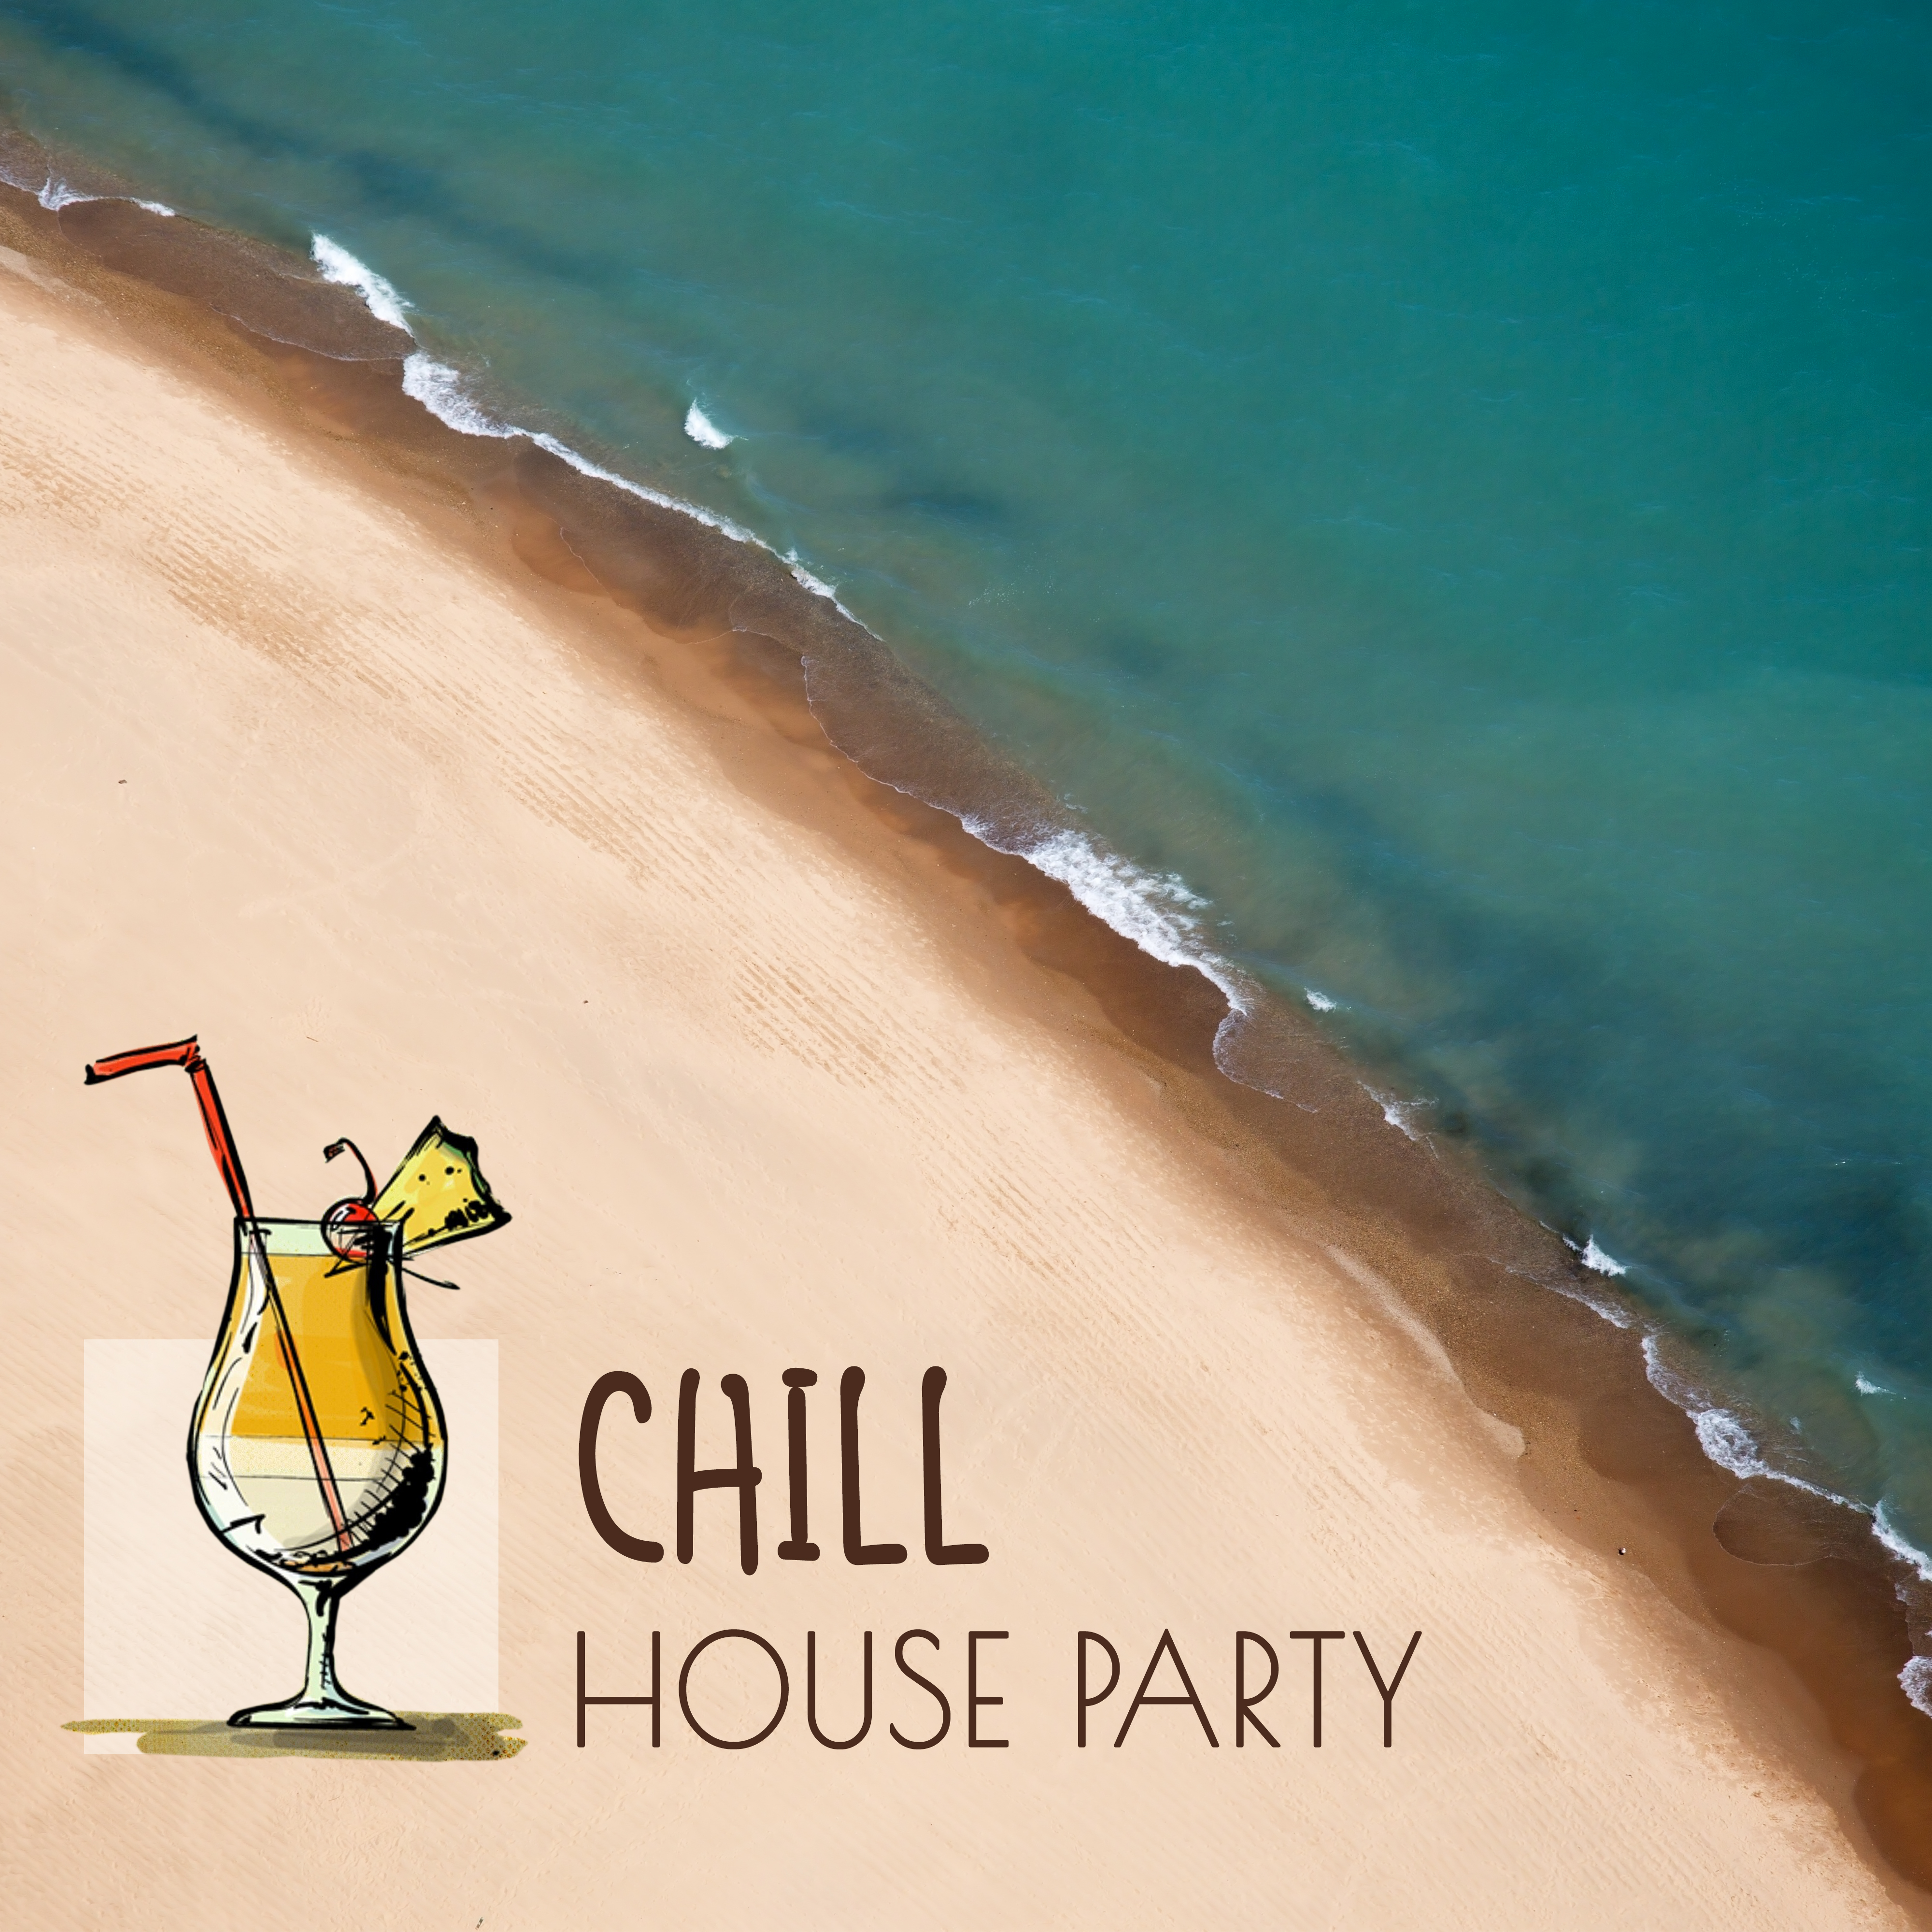 Chill House Party – Chill Out Music, Party Time, Have Fun in Home